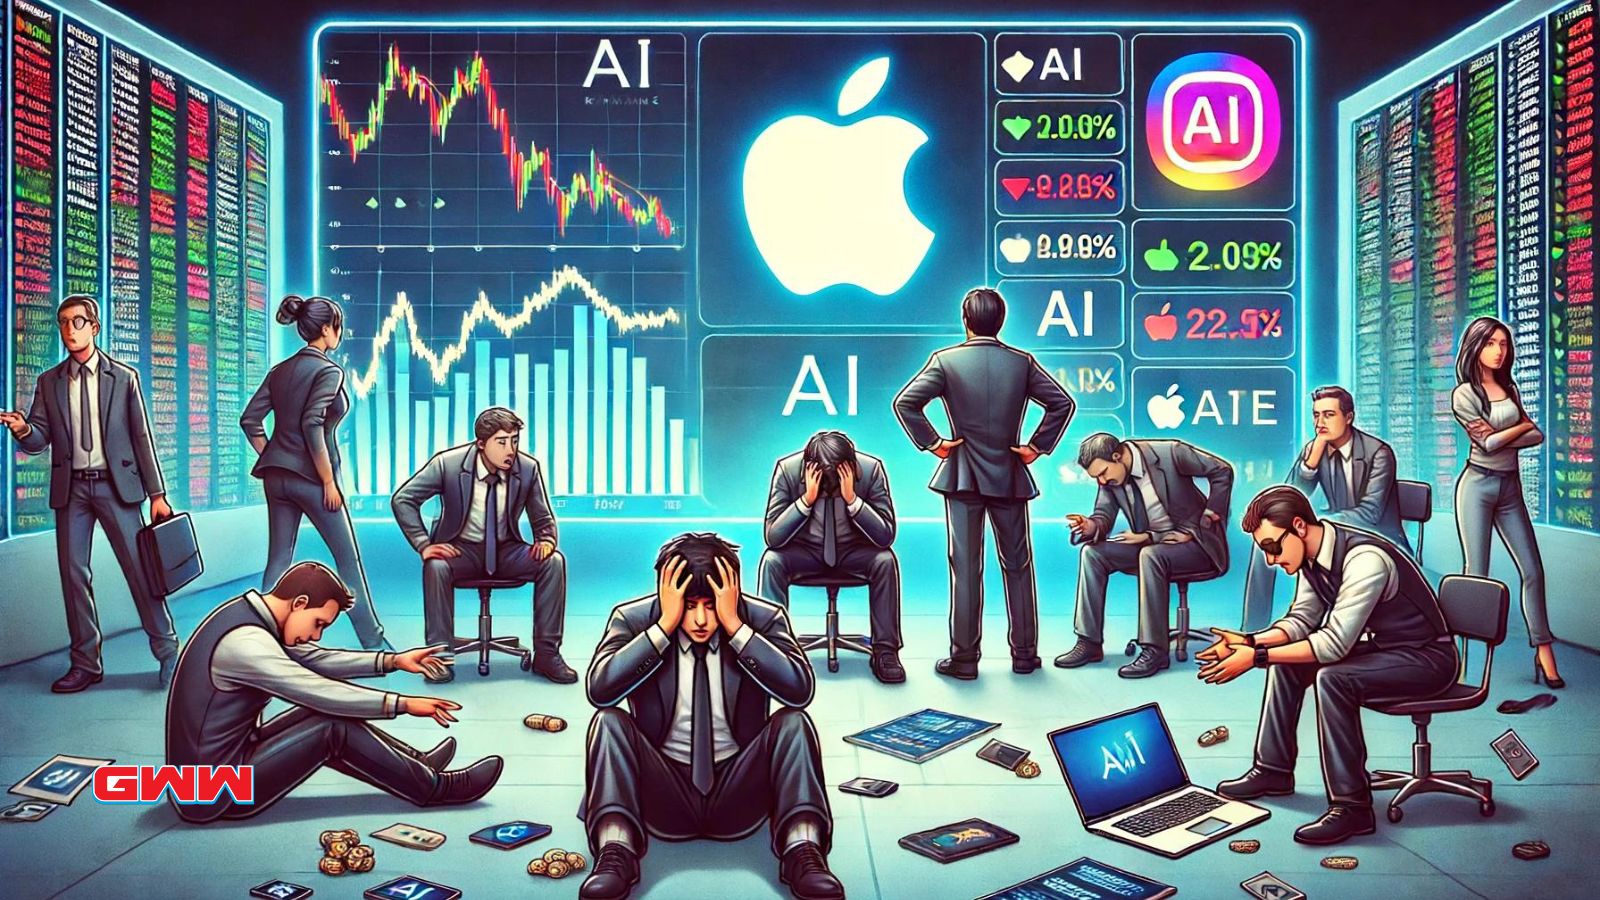 Businessmen in a trading room with AI, Apple logos, and fluctuating stocks